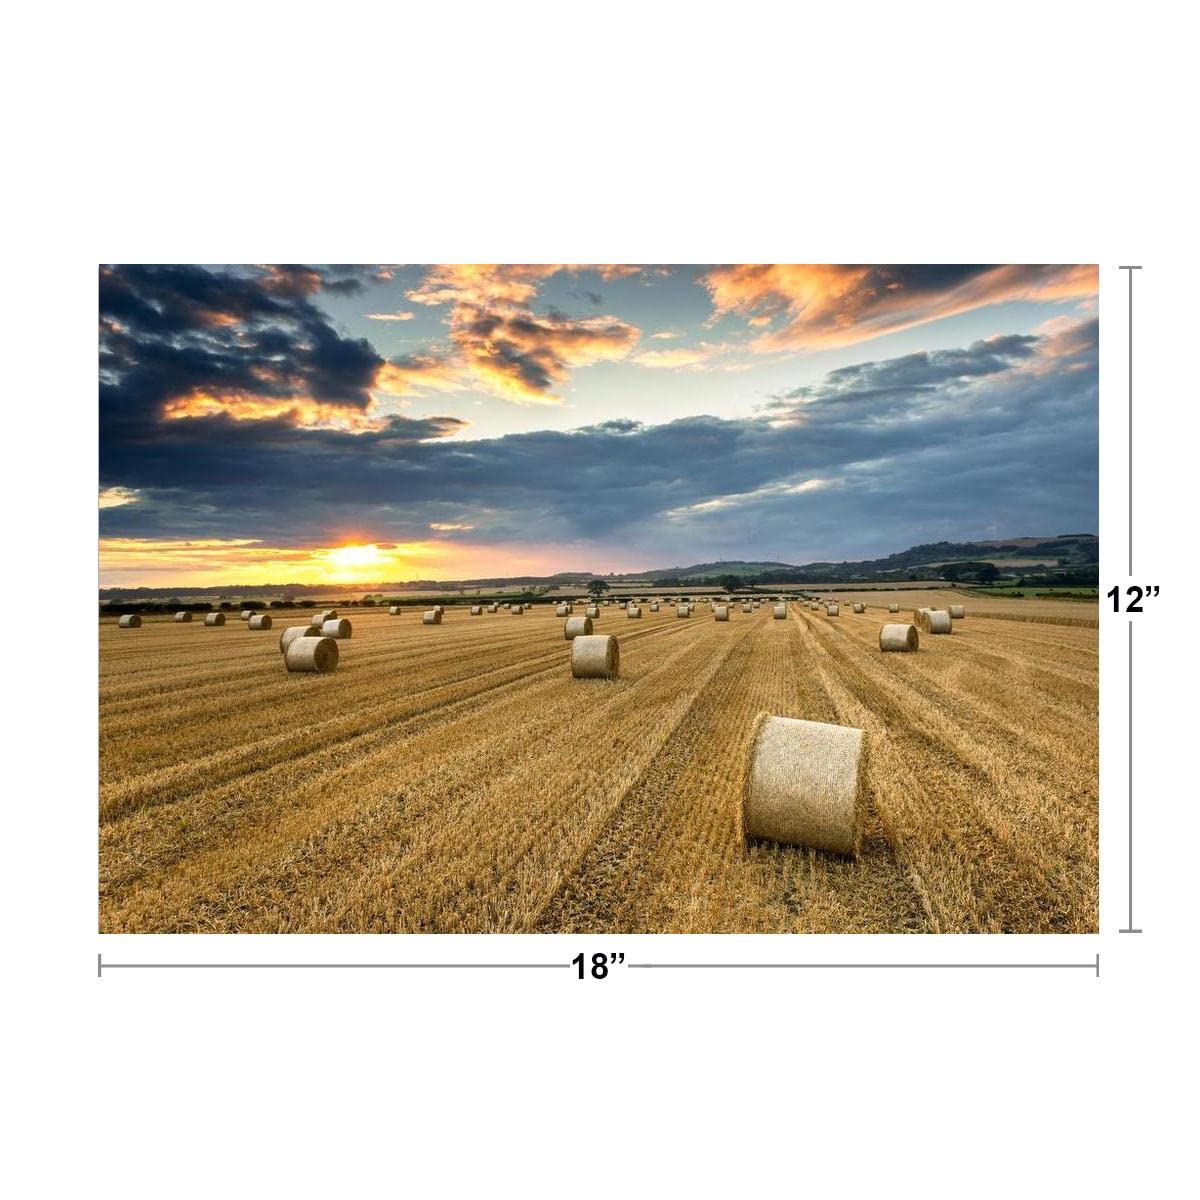 Farmers Field Full of Hay Bales at Sunset Roseberry Topping Photo Photograph Cool Wall Decor Art Print Poster 18x12